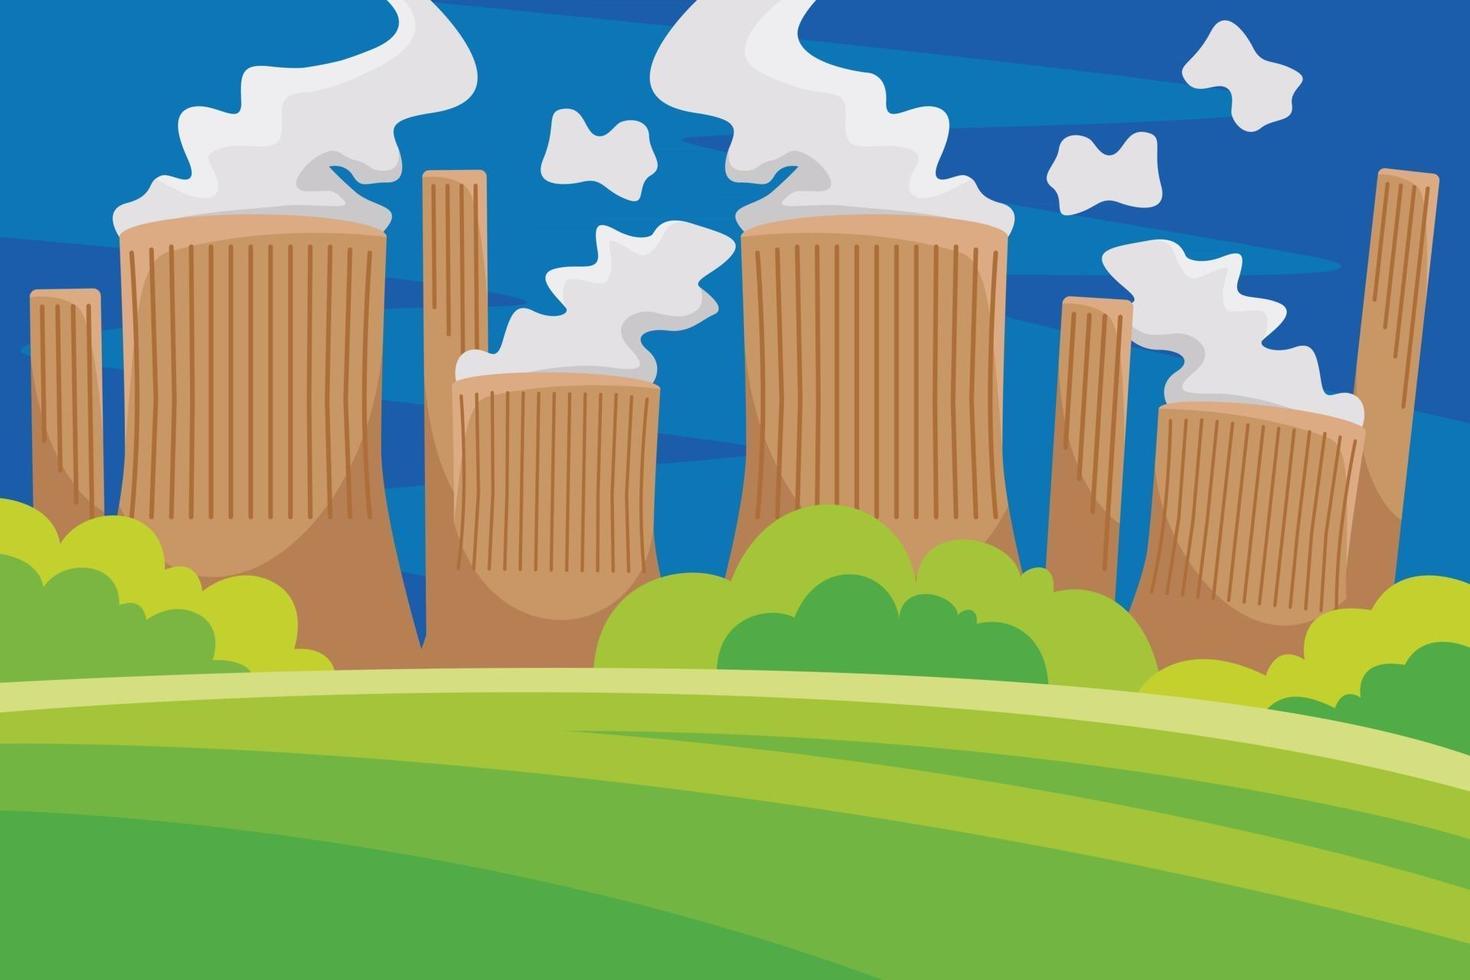 Electrical Power Station Vector Illustration